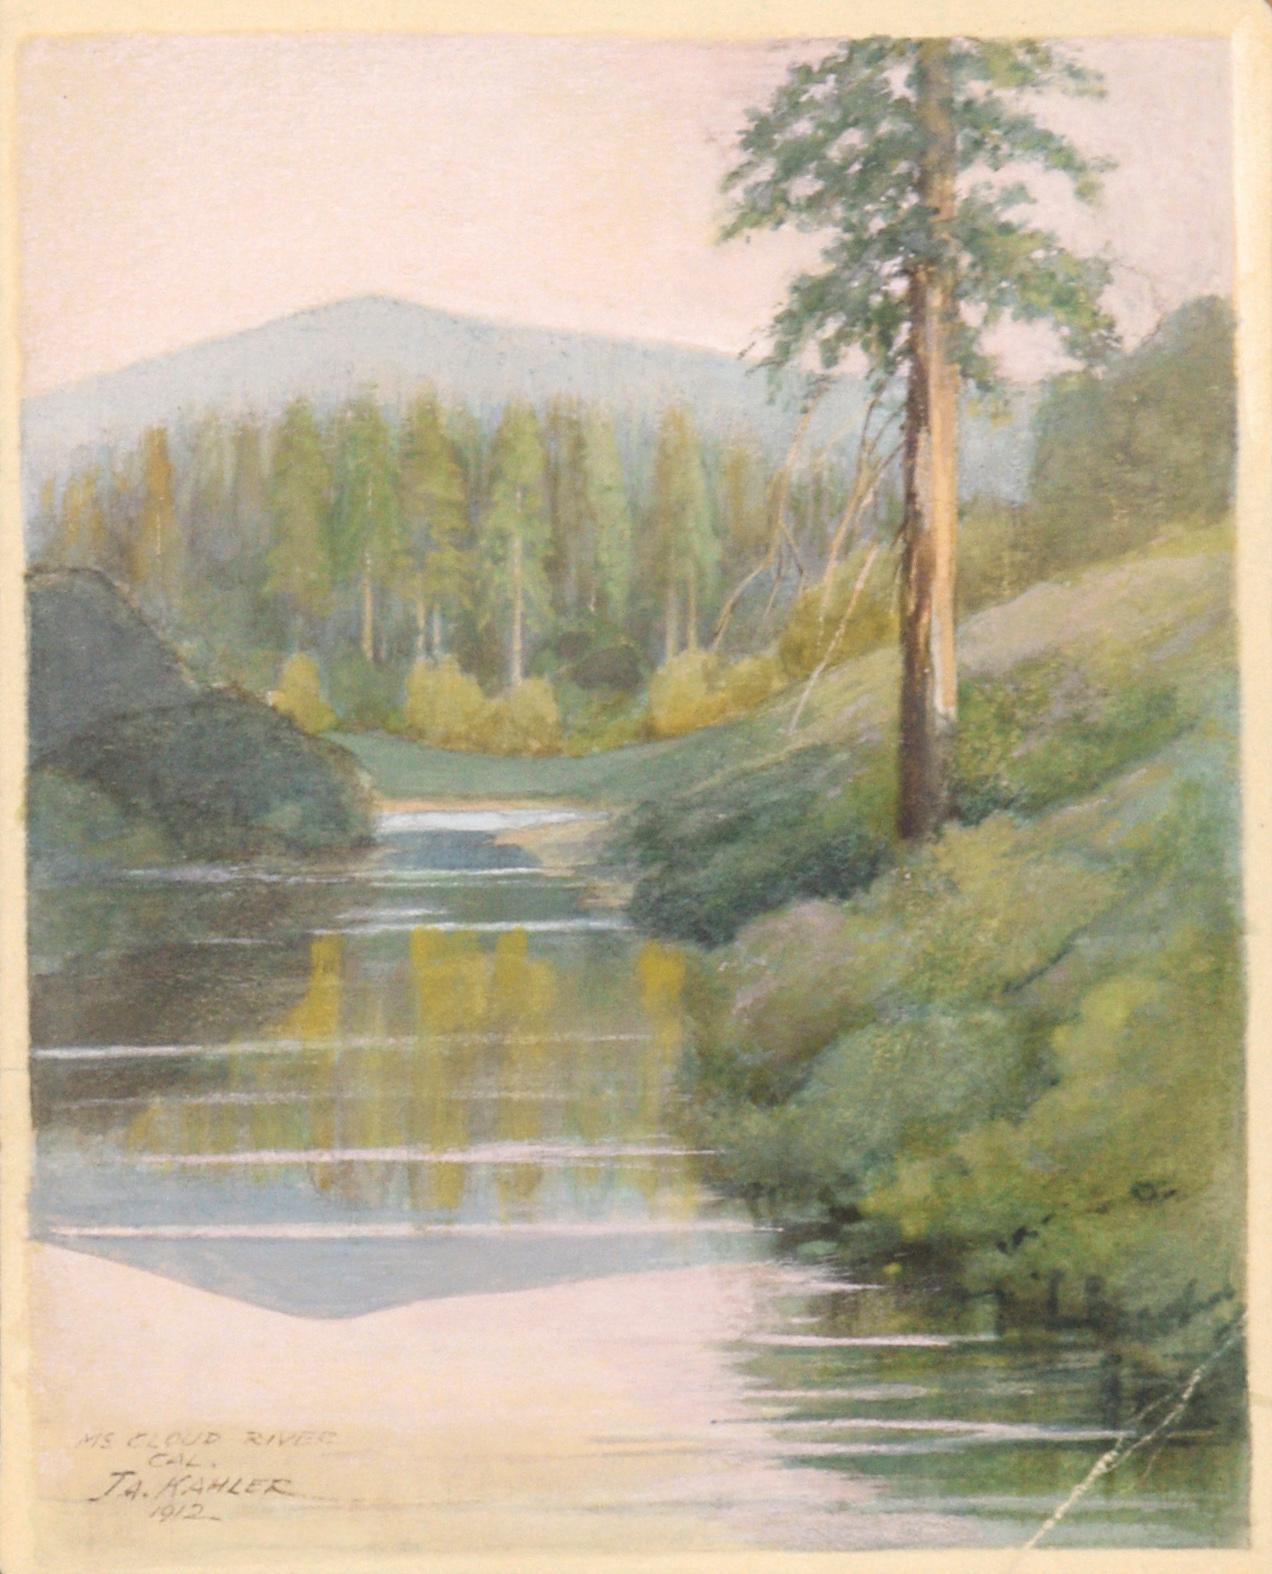 Tranquil Stream - Early 20th Century Forest Landscape  - Art by Joseph Anthony Kahler 